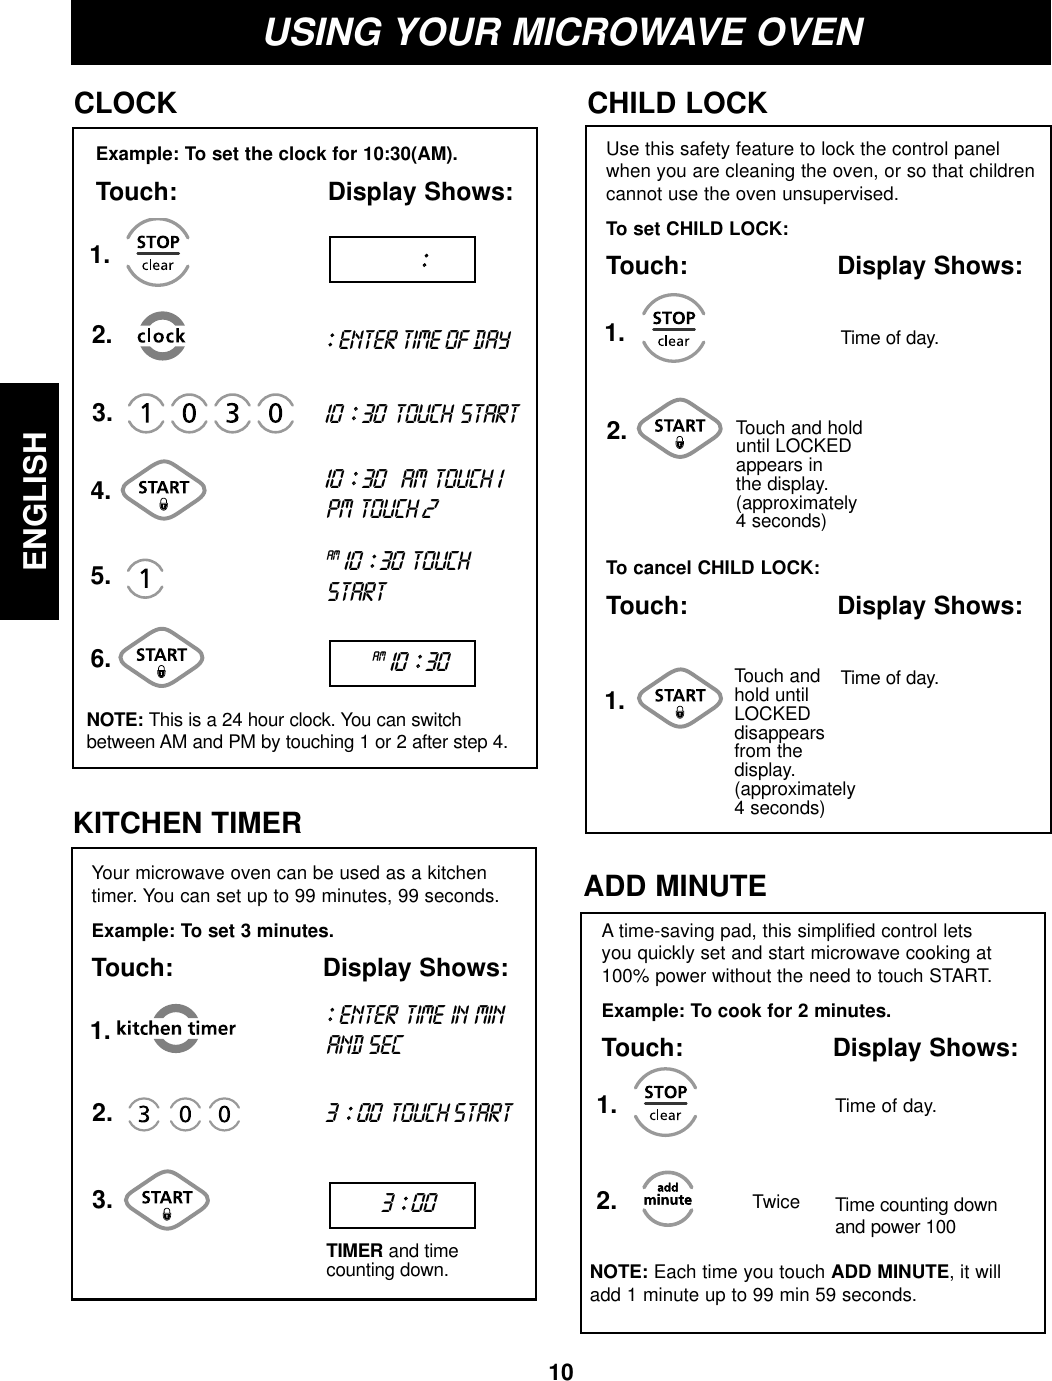 10ENGLISHUSING YOUR MICROWAVE OVENExample: To set the clock for 10:30(AM).Touch: Display Shows:CLOCK1.2.3.5.NOTE: This is a 24 hour clock. You can switchbetween AM and PM by touching 1 or 2 after step 4.::ENTER TIME OF DAY10 ::30 TOUCH START10 ::30AM TOUCH 1PM TOUCH 2AM10 ::30 TOUCHSTART::ENTER TIME IN MINAND SEC3 ::00TOUCH STARTUse this safety feature to lock the control panelwhen you are cleaning the oven, or so that childrencannot use the oven unsupervised.To set CHILD LOCK:Touch: Display Shows:CHILD LOCKTouch and holduntil LOCKEDappears inthe display.(approximately4 seconds)To cancel CHILD LOCK:Touch: Display Shows:Touch andhold untilLOCKEDdisappears from the display.(approximately4 seconds)Time of day.Time of day.1.1.2.Your microwave oven can be used as a kitchentimer. You can set up to 99 minutes, 99 seconds.Example: To set 3 minutes.Touch: Display Shows:KITCHEN TIMERTIMER and timecounting down.1.2.3.6.4.::AM10 ::303 ::00Time of day.TwiceADD MINUTEA time-saving pad, this simplified control letsyou quickly set and start microwave cooking at100% power without the need to touch START.Example: To cook for 2 minutes.Touch: Display Shows:1.2.NOTE: Each time you touch ADD MINUTE, it willadd 1 minute up to 99 min 59 seconds.Time counting downand power 100